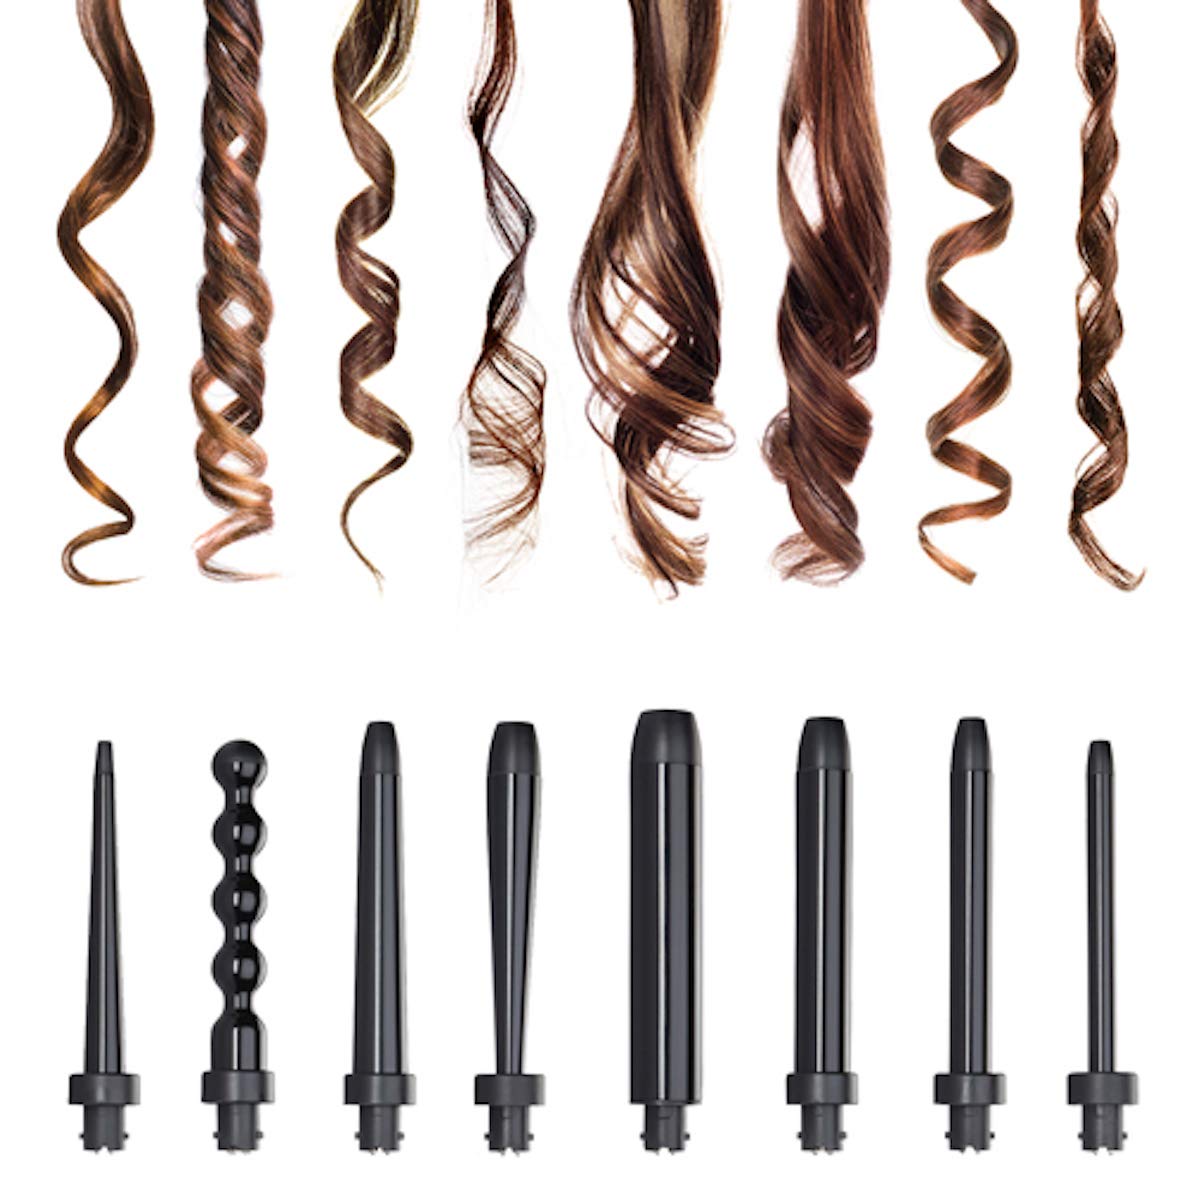 NuMe's curling wands